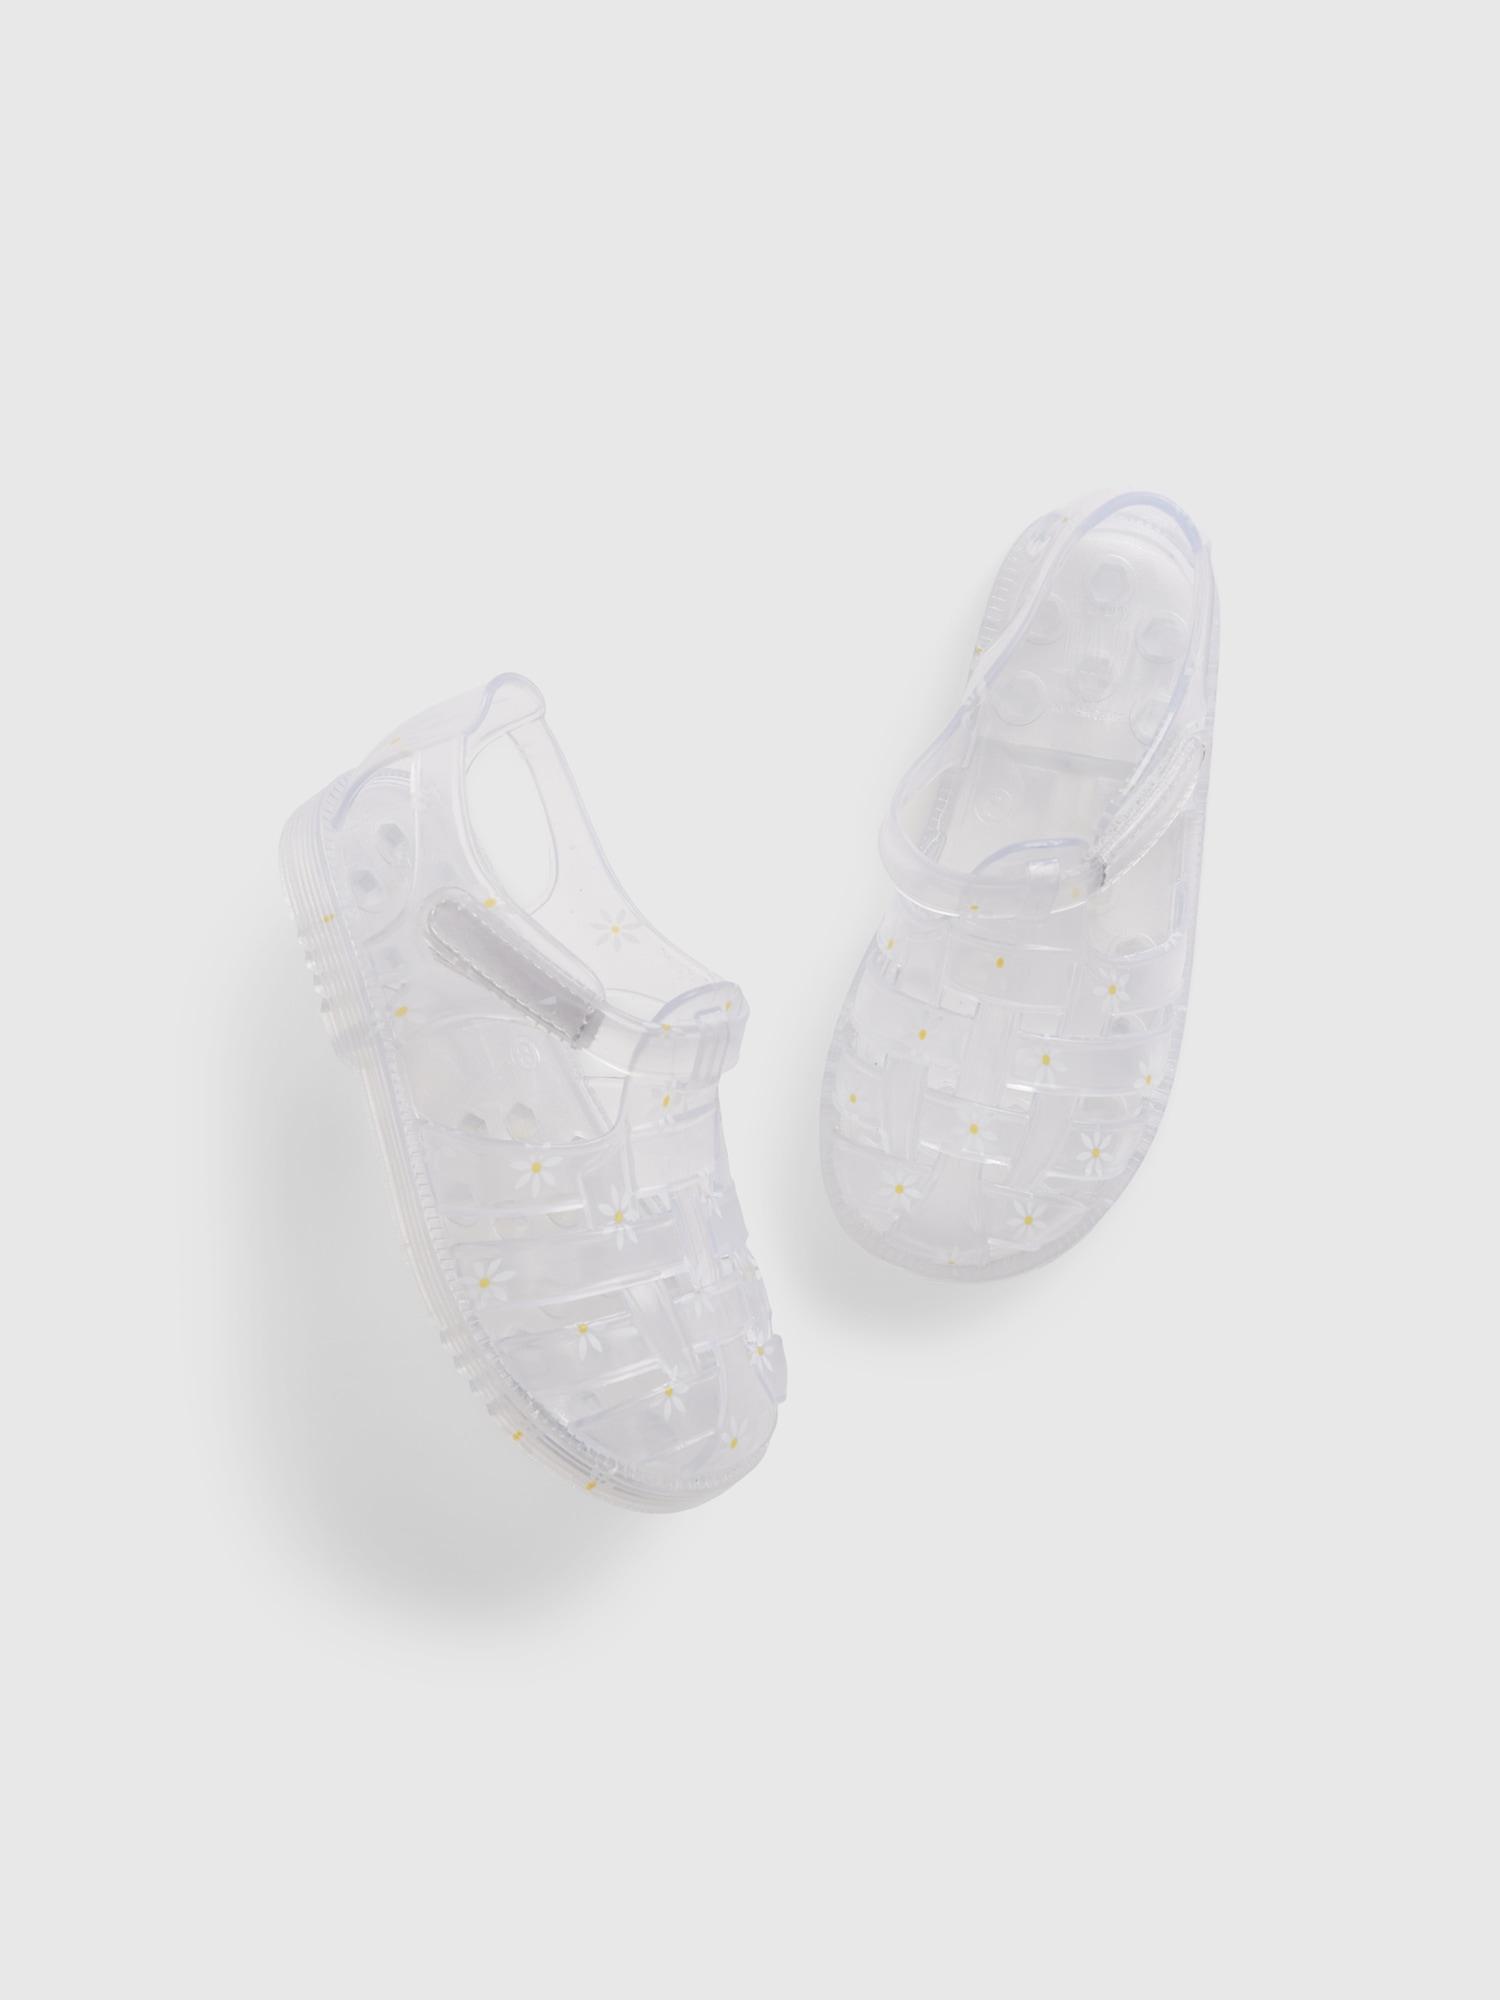 Gap Toddler Jelly Sandals gray. 1